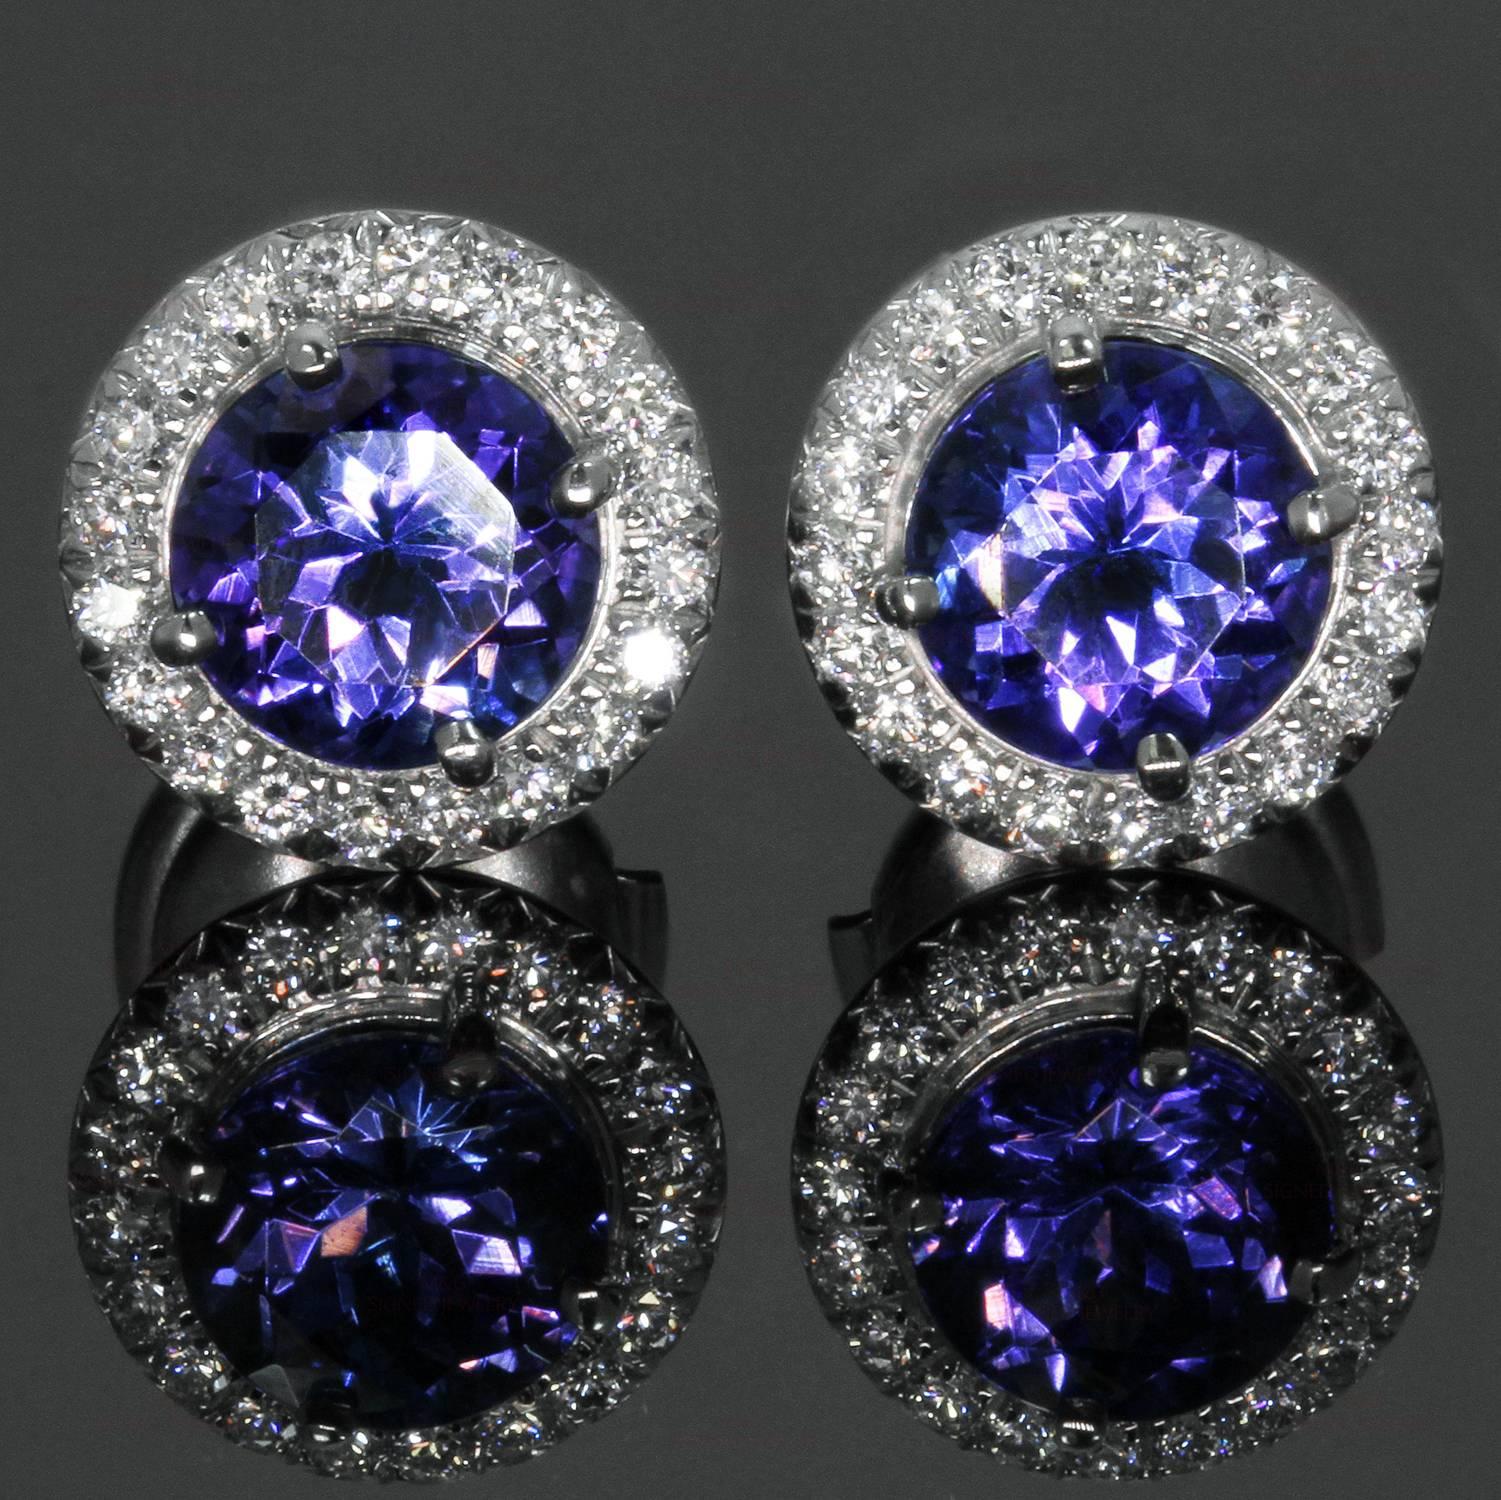 These exquisite stud earrings from Tiffany's Seleste collection are crafted in platinum and set dazzling tanzanites of an estimated 1.40 carats surrounded by brilliant-cut round diamonds of an estimated 0.20 carats. Made in United States circa